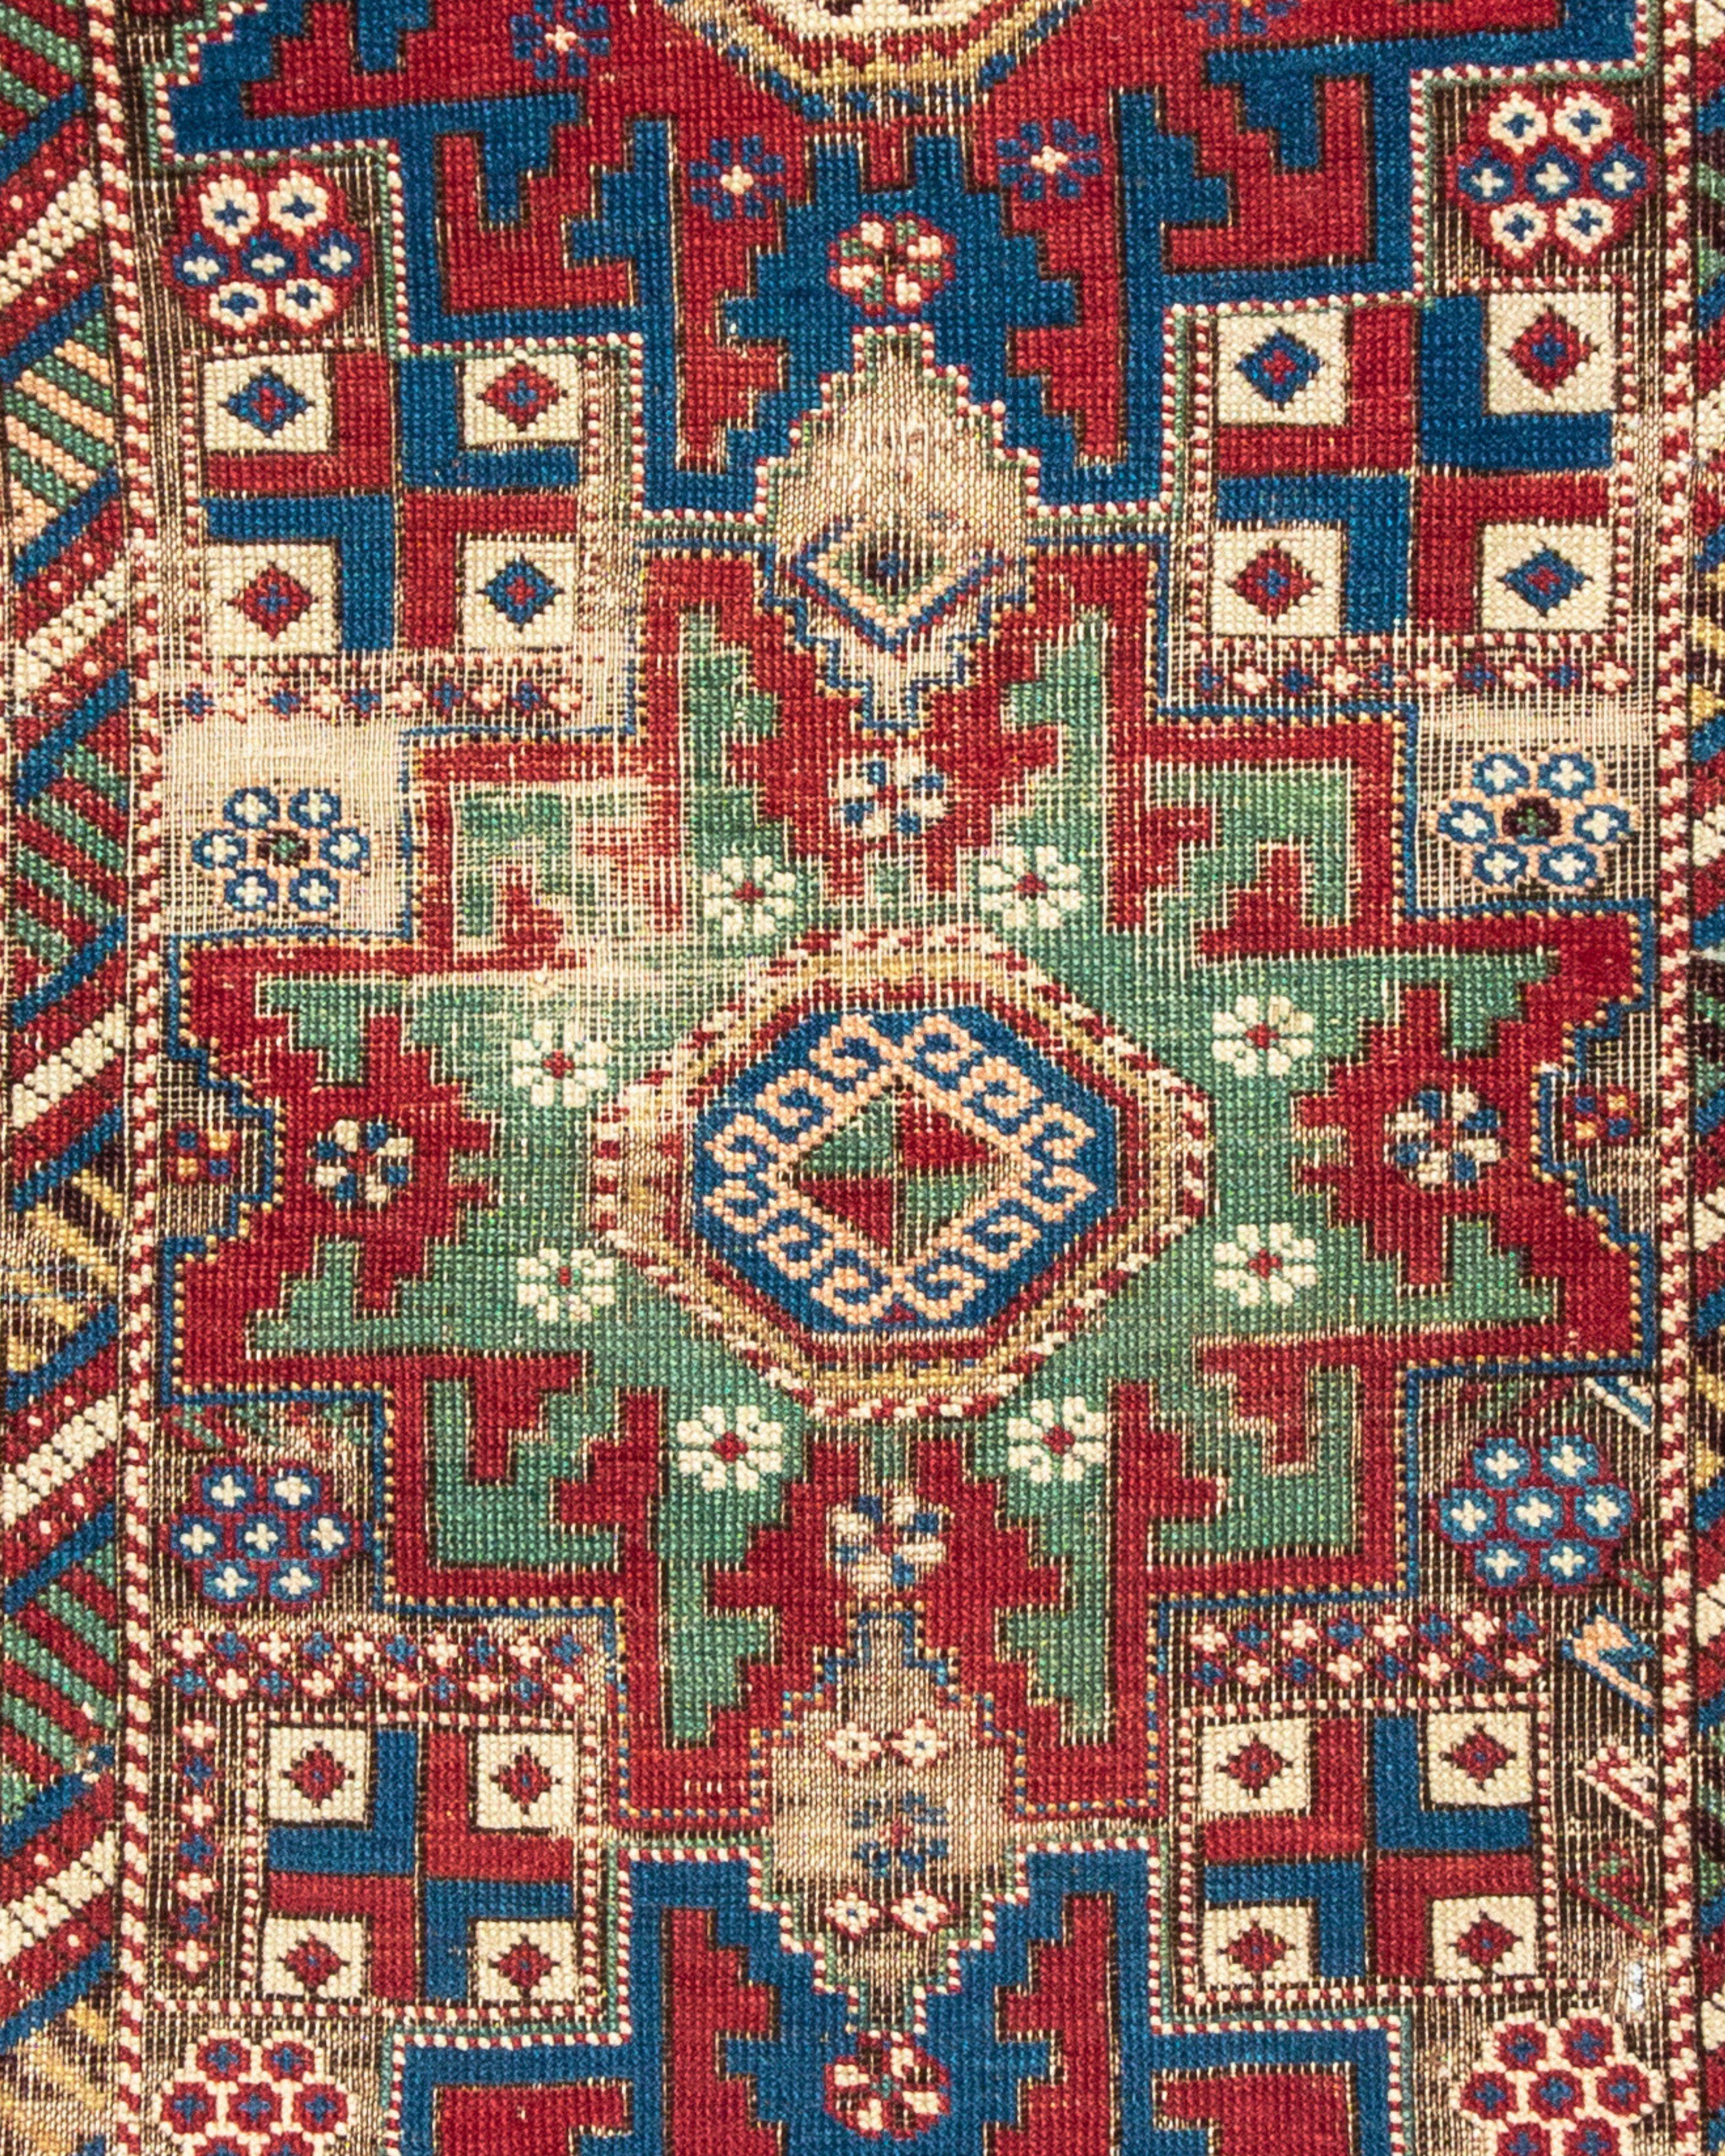 Hand-Woven Antique Caucasian Kuba Rug, Late 19th Century For Sale